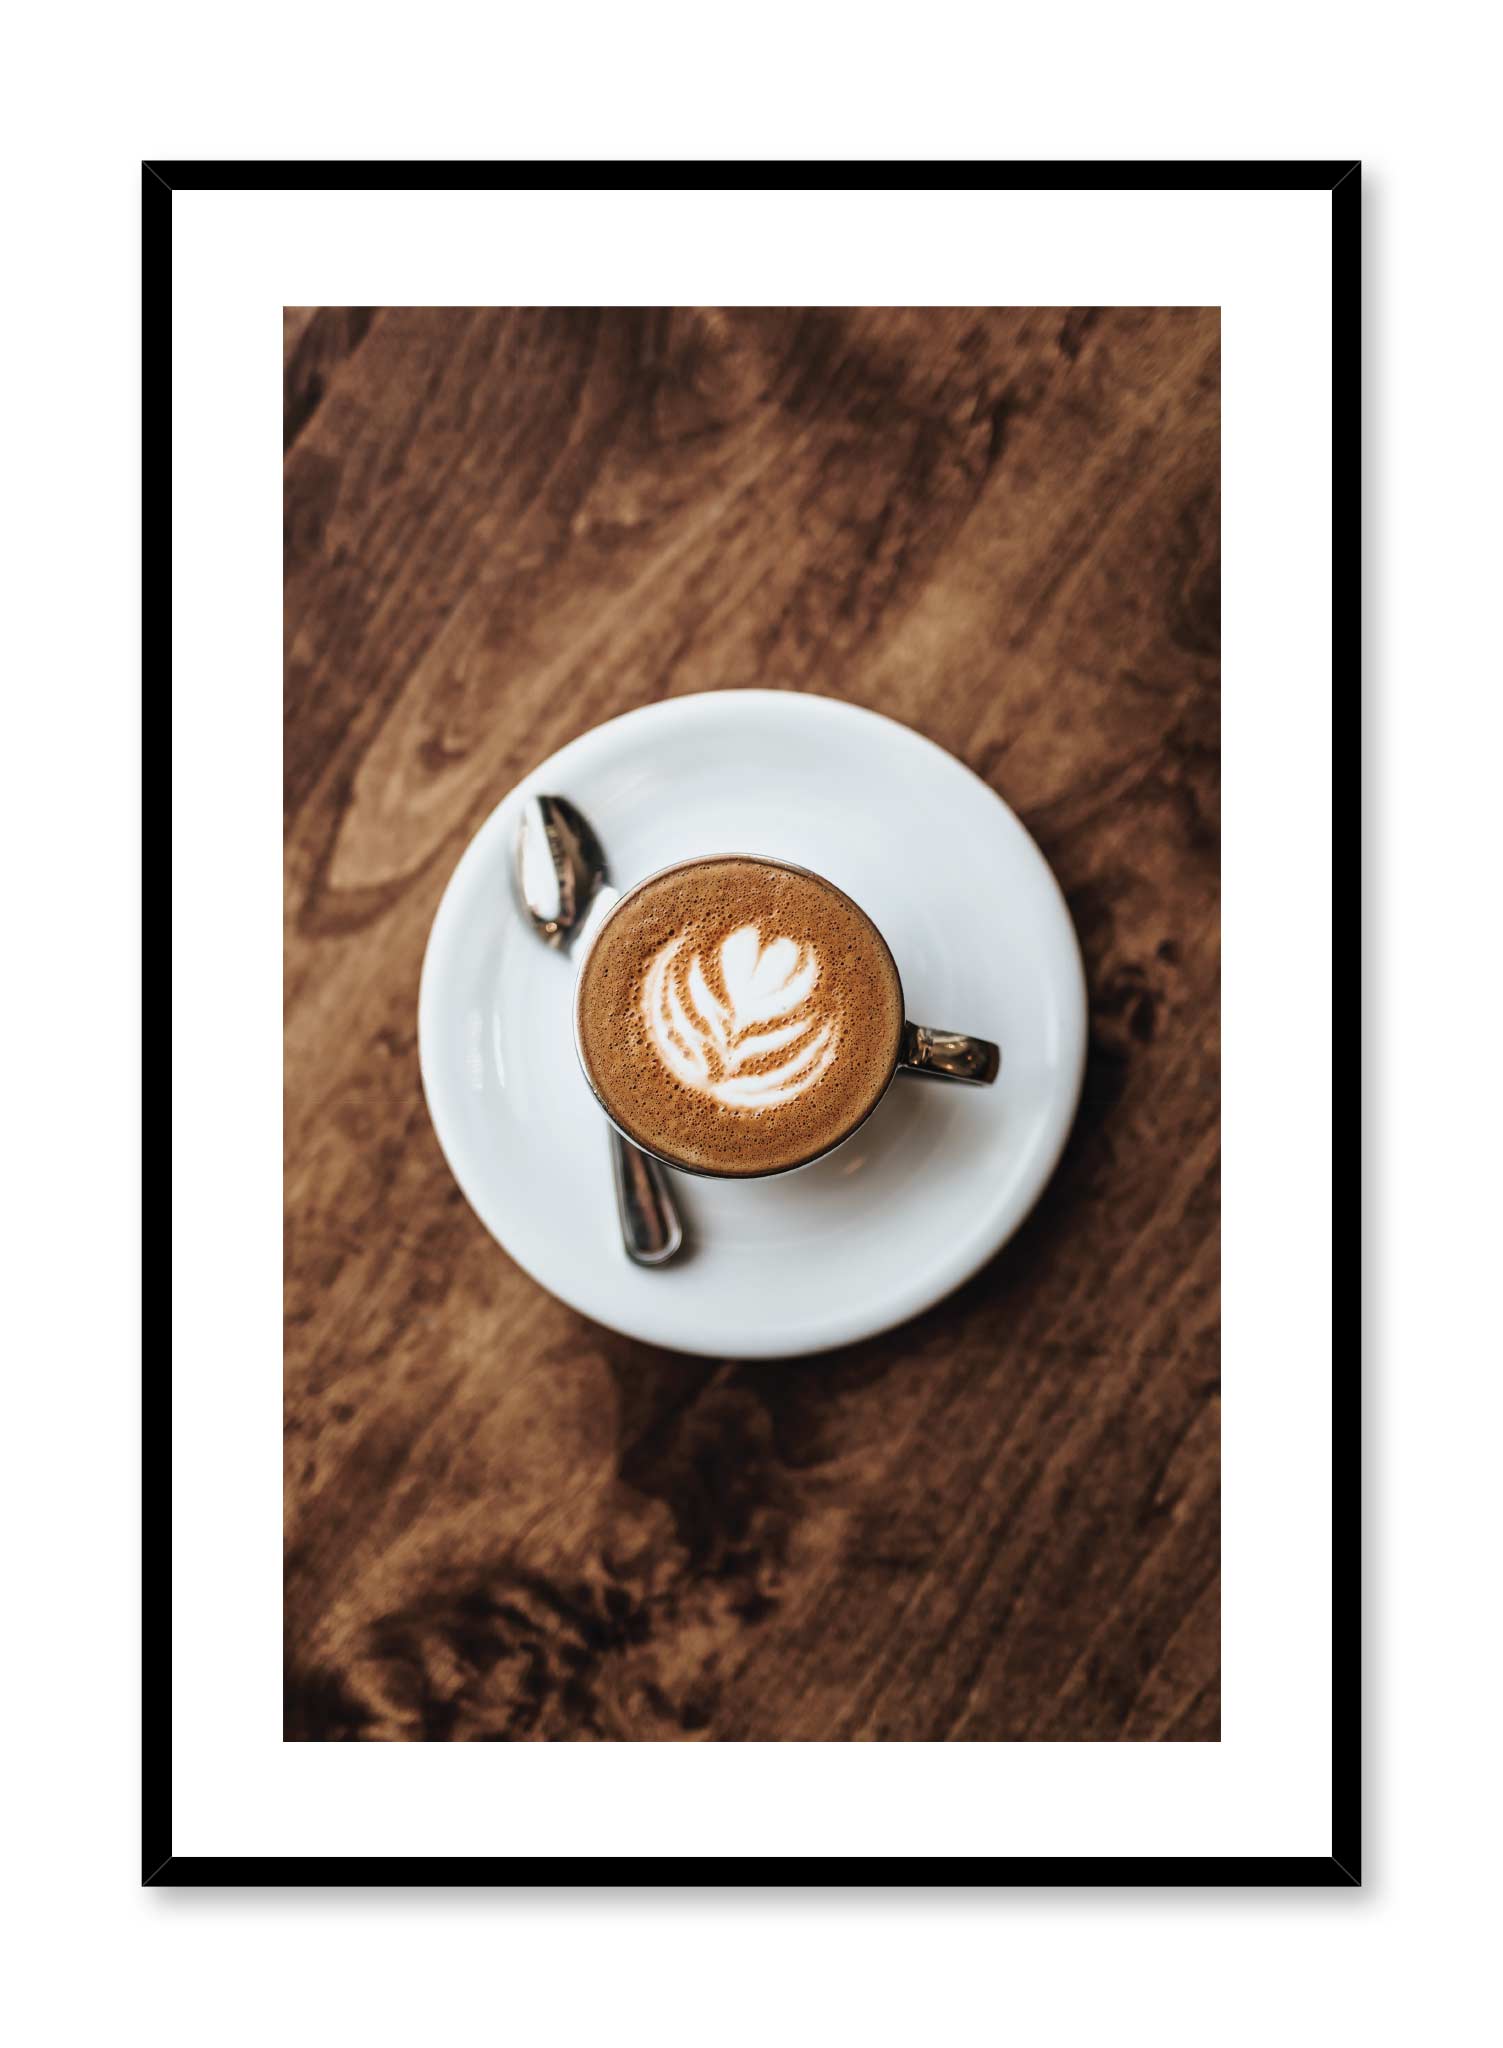 Morning Glory is a coffee photography poster by Opposite Wall.